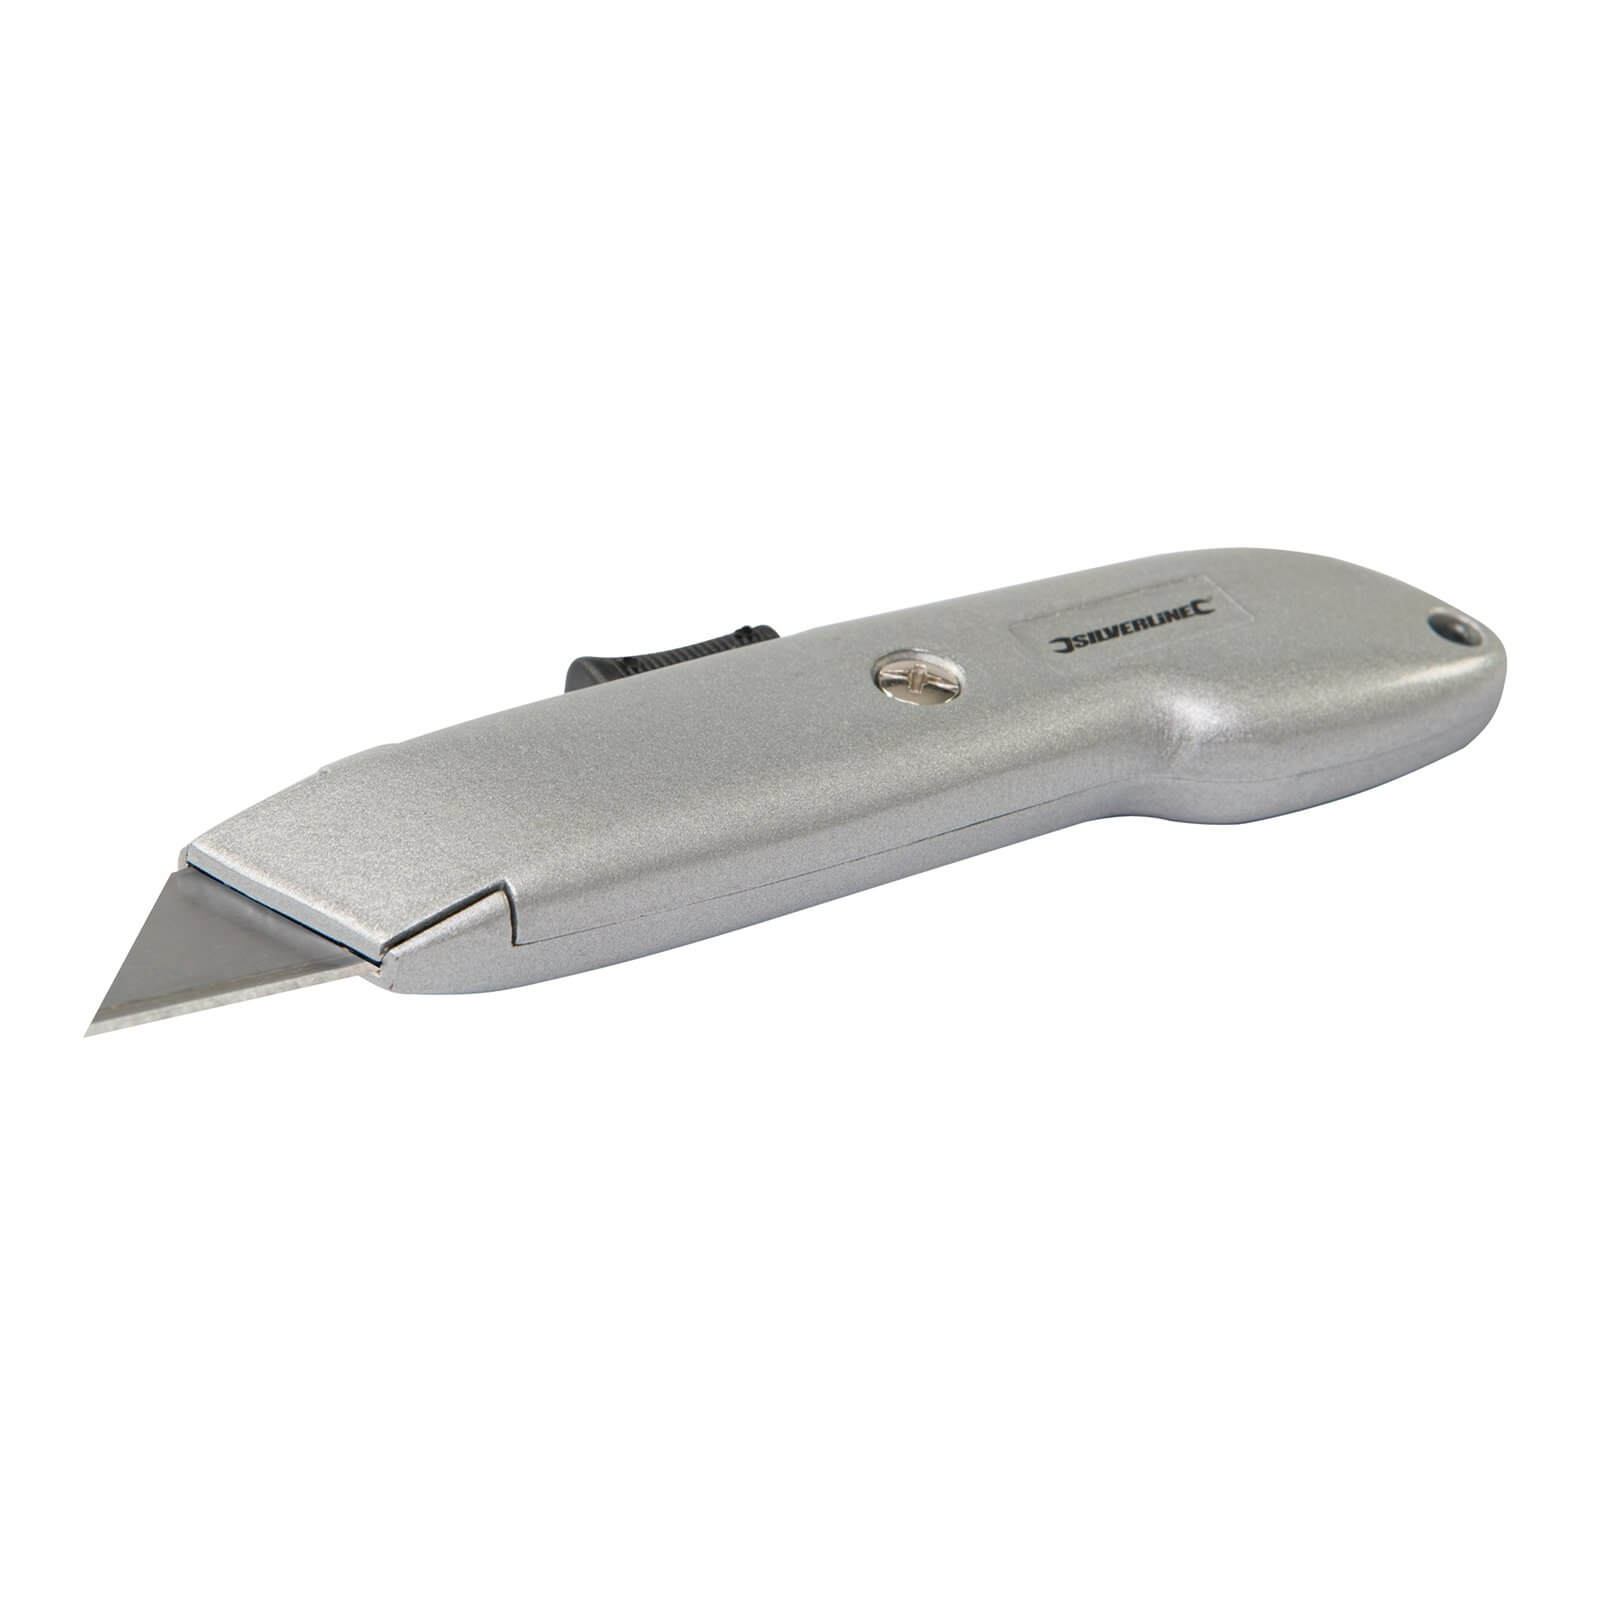 Silverline Auto Retractable Safety Knife 140mm